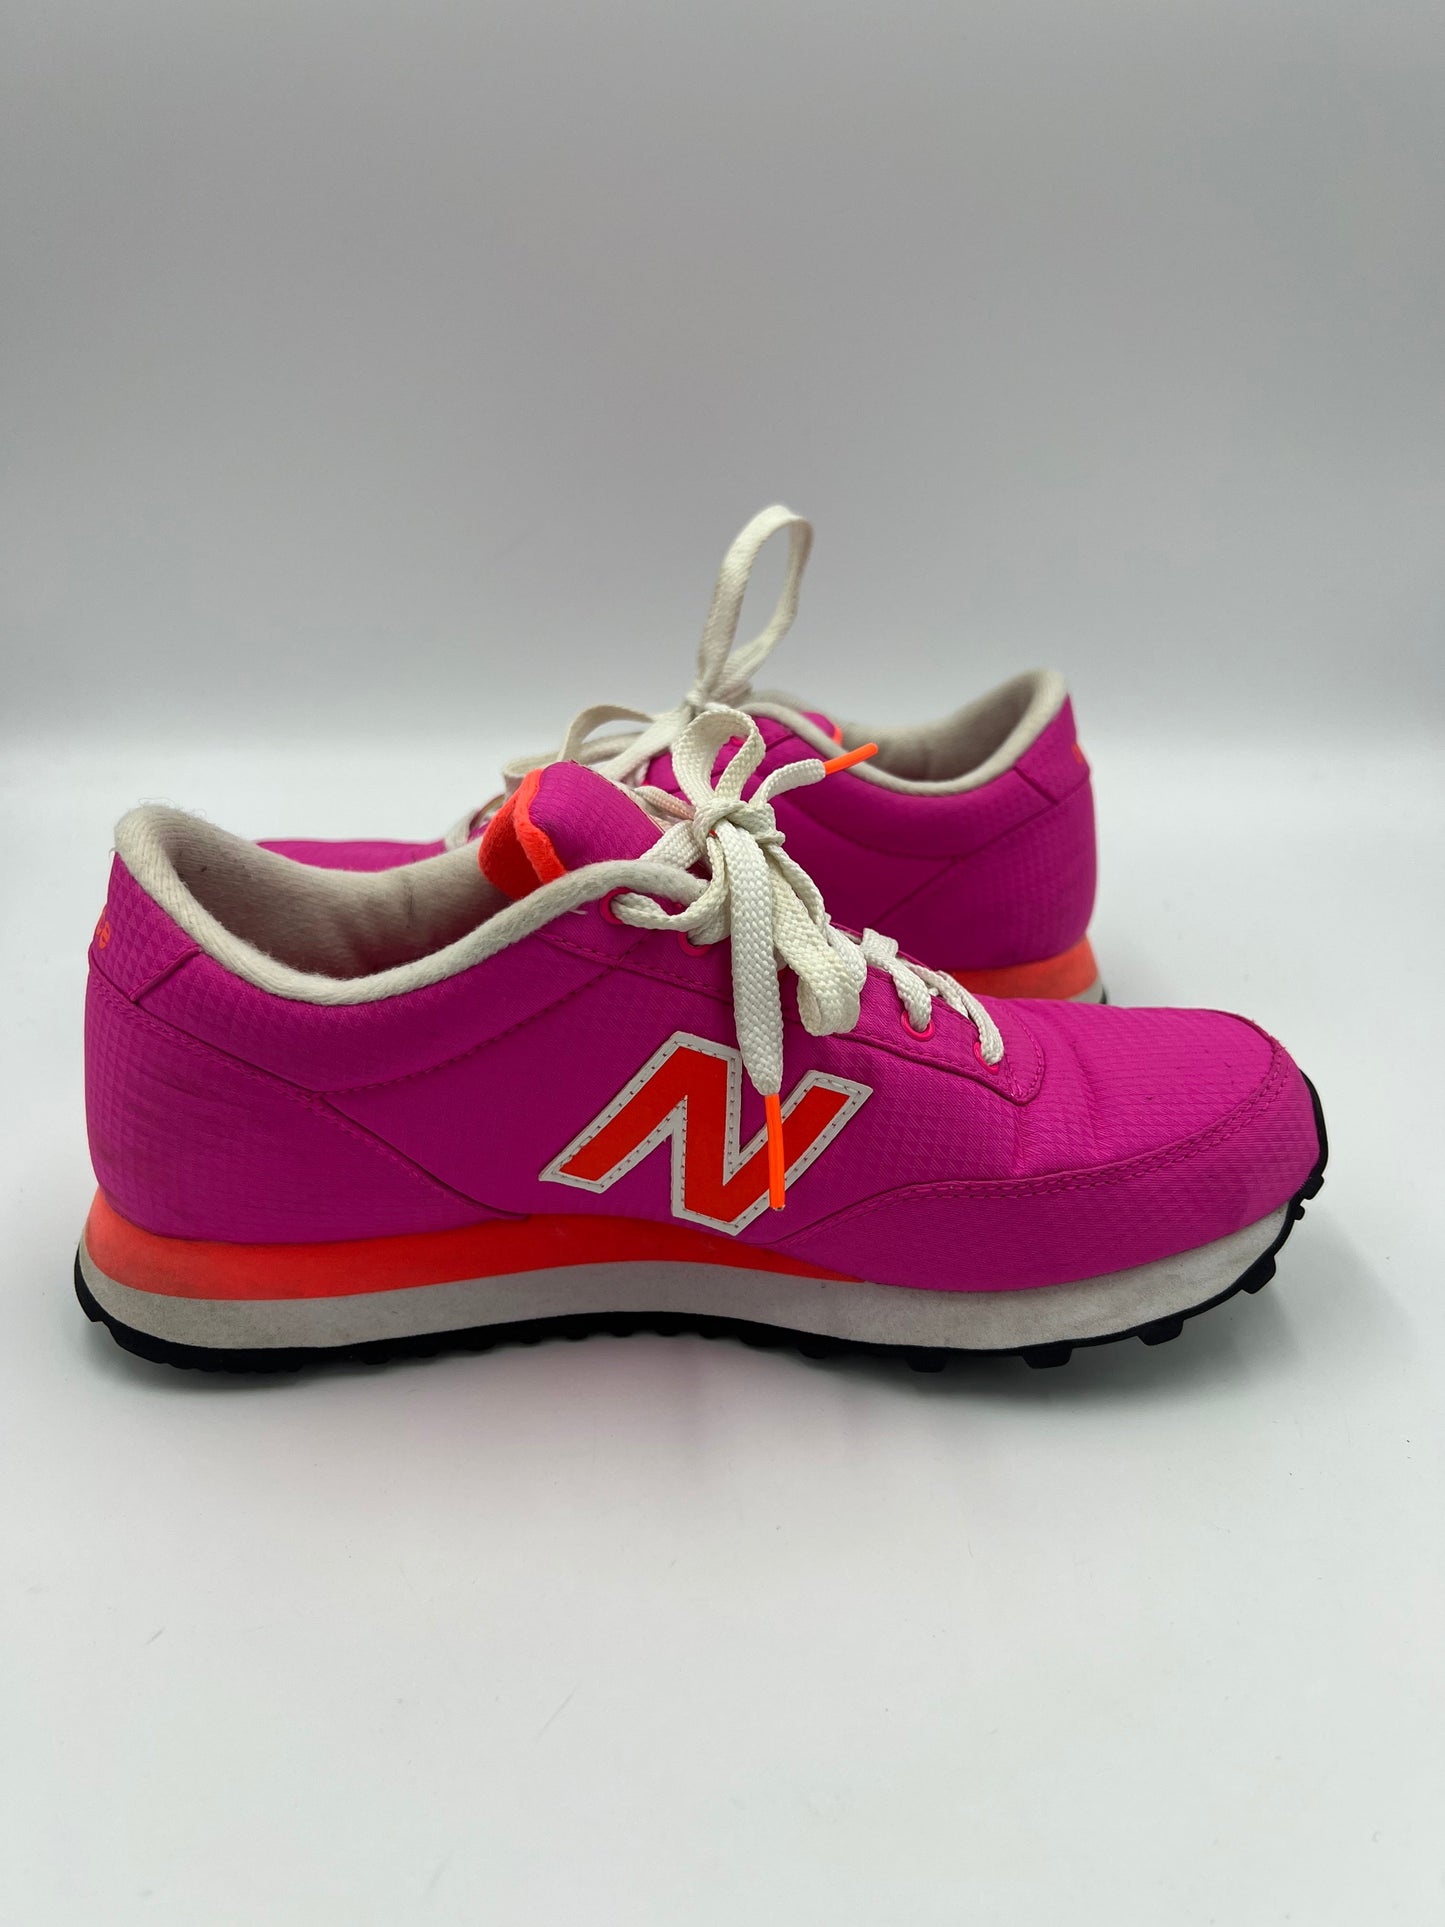 Pink Shoes Athletic New Balance, Size 8